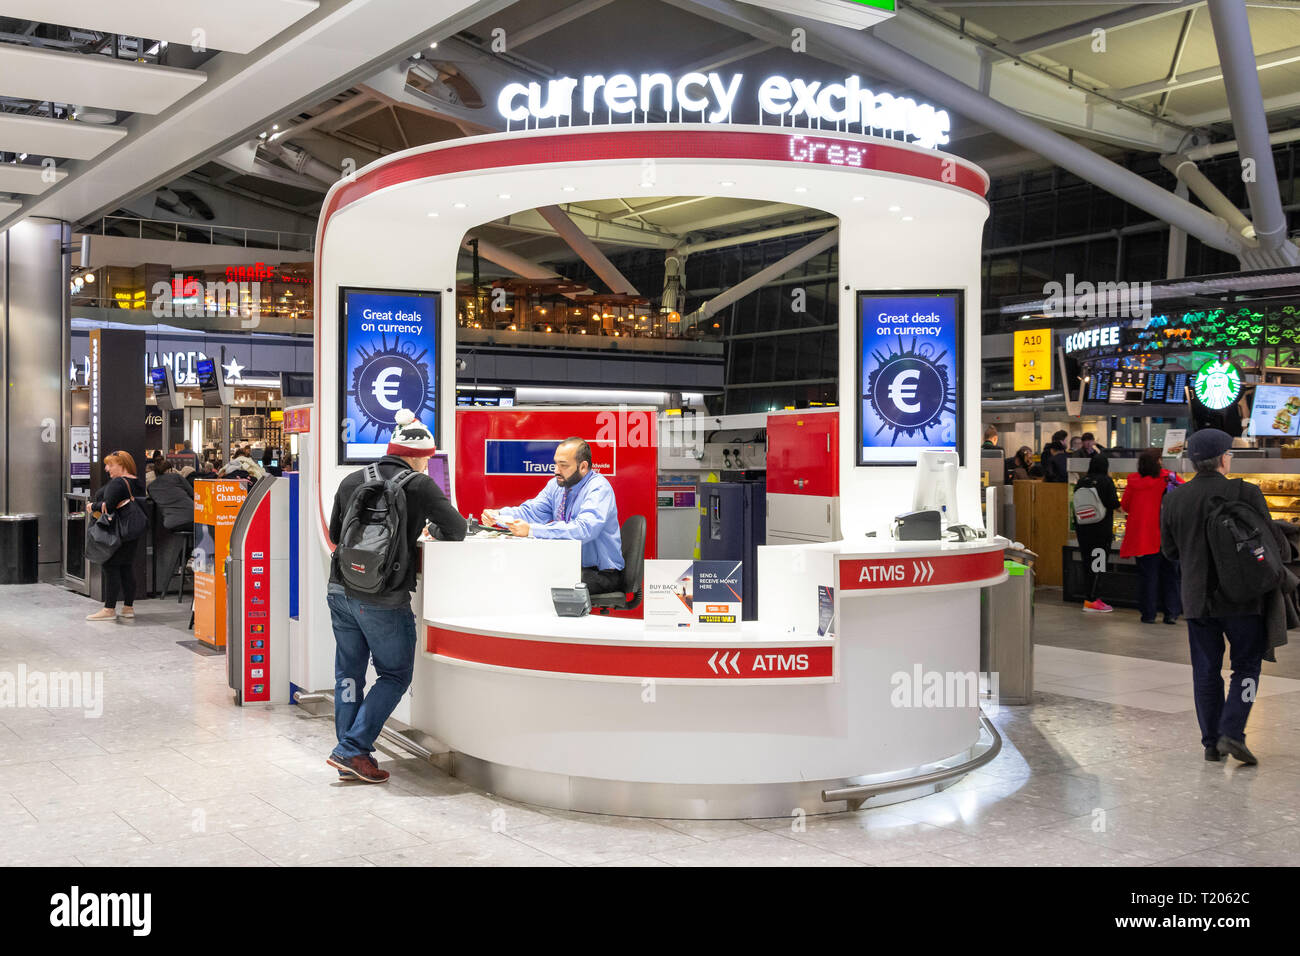 Currency exchange kiosk in departure lounge, Terminal 5, London Heathrow Airport. London Borough of Hounslow, Greater London, England, United Kingdom Stock Photo